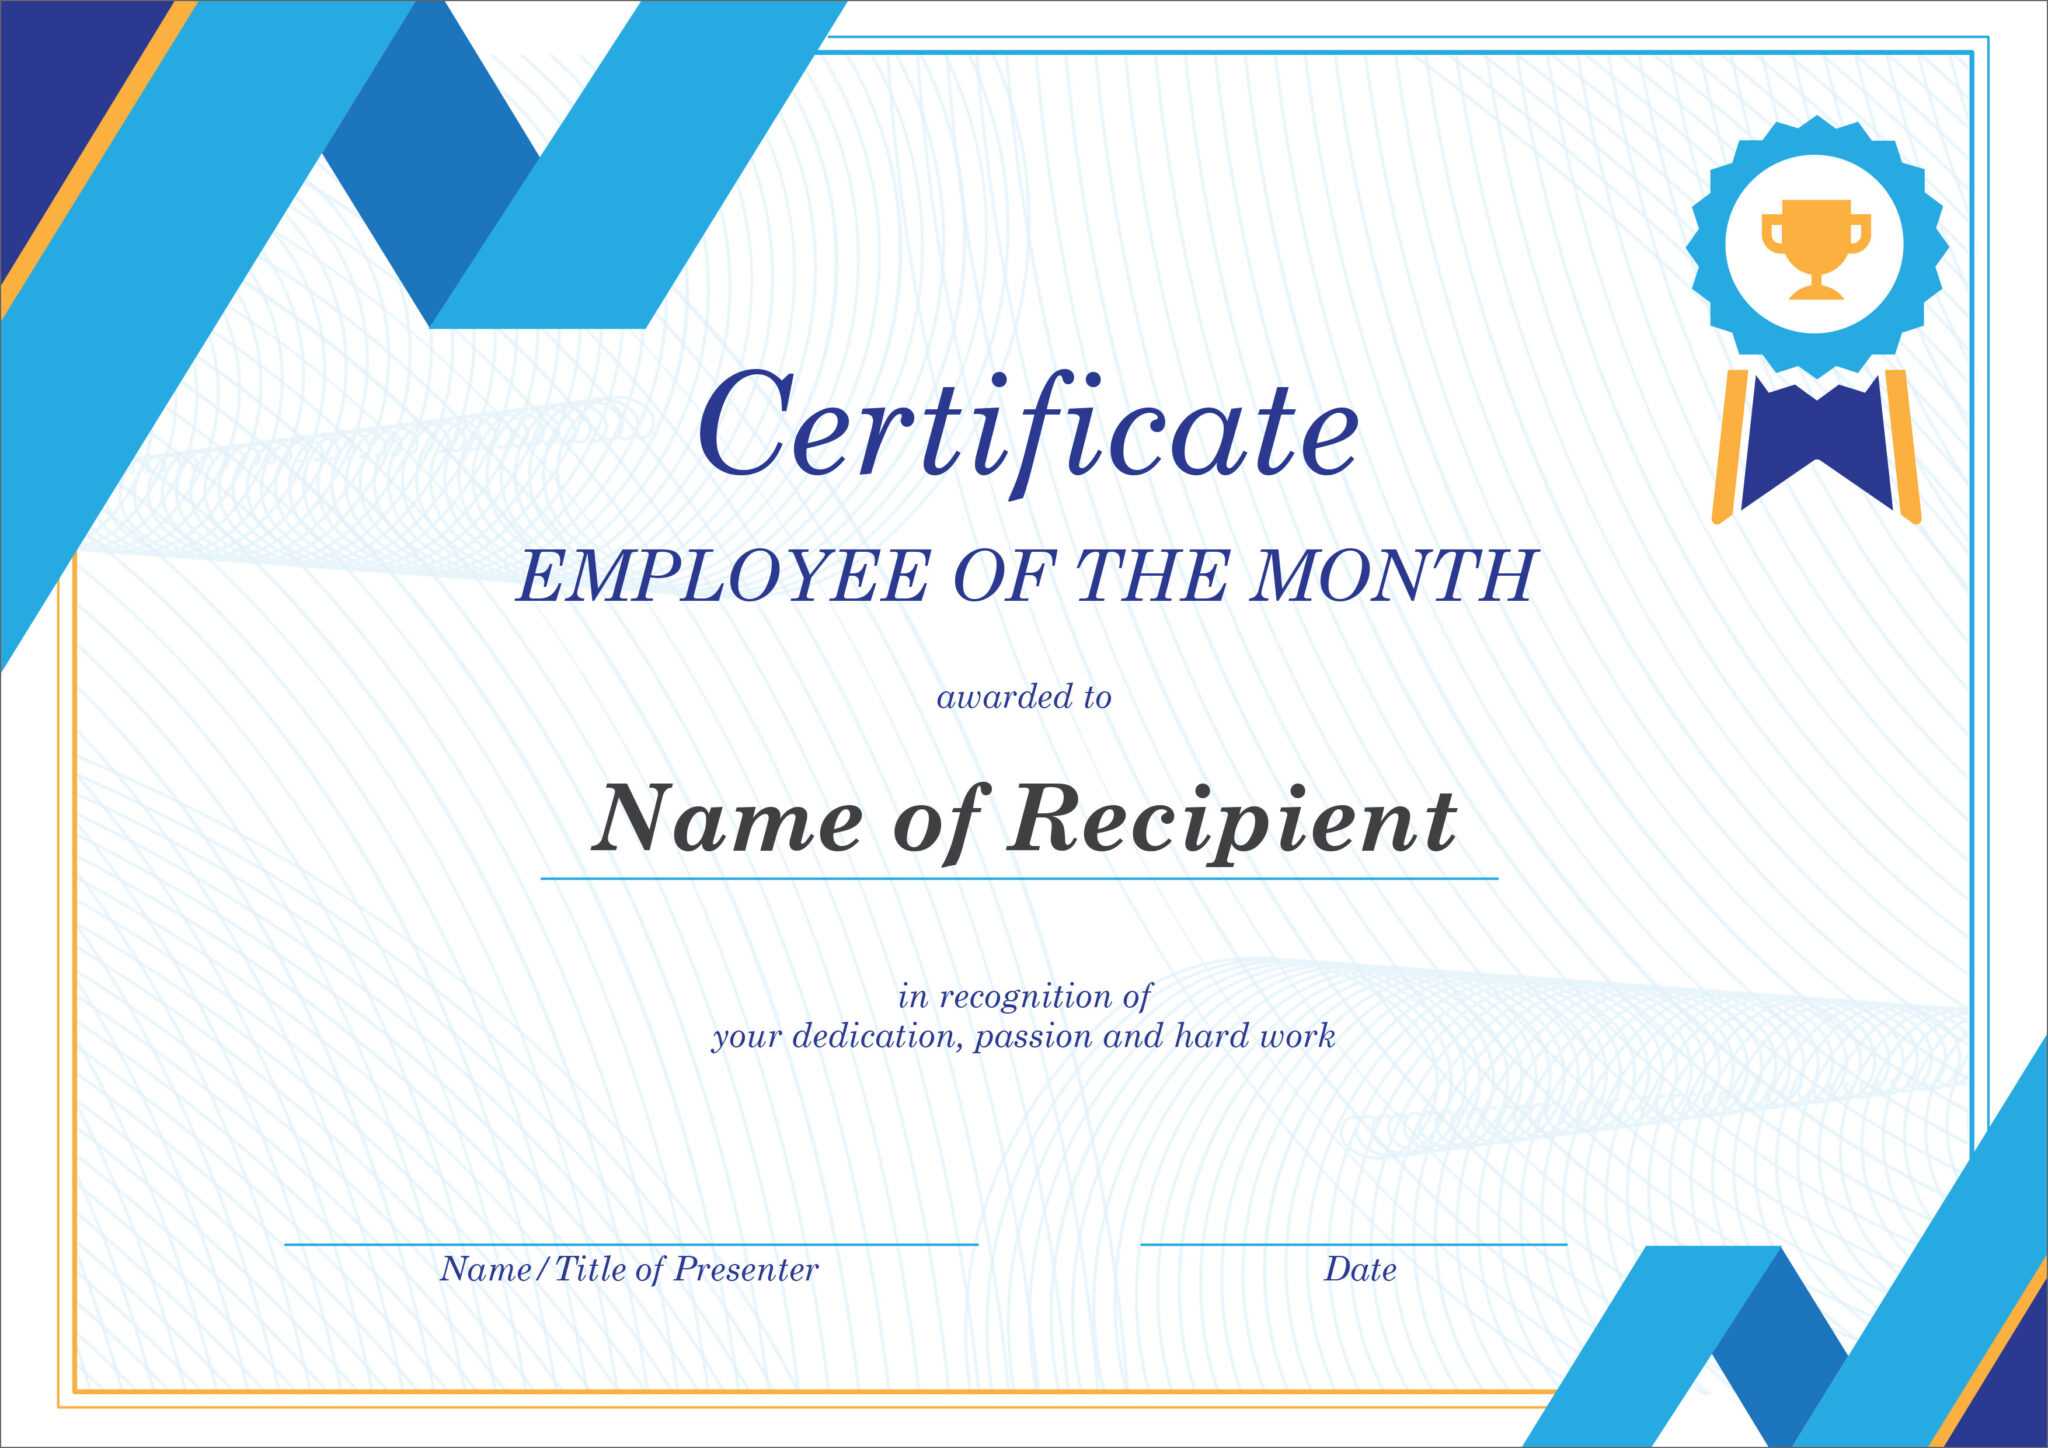 50-free-creative-blank-certificate-templates-in-psd-throughout-best-employee-award-certificate